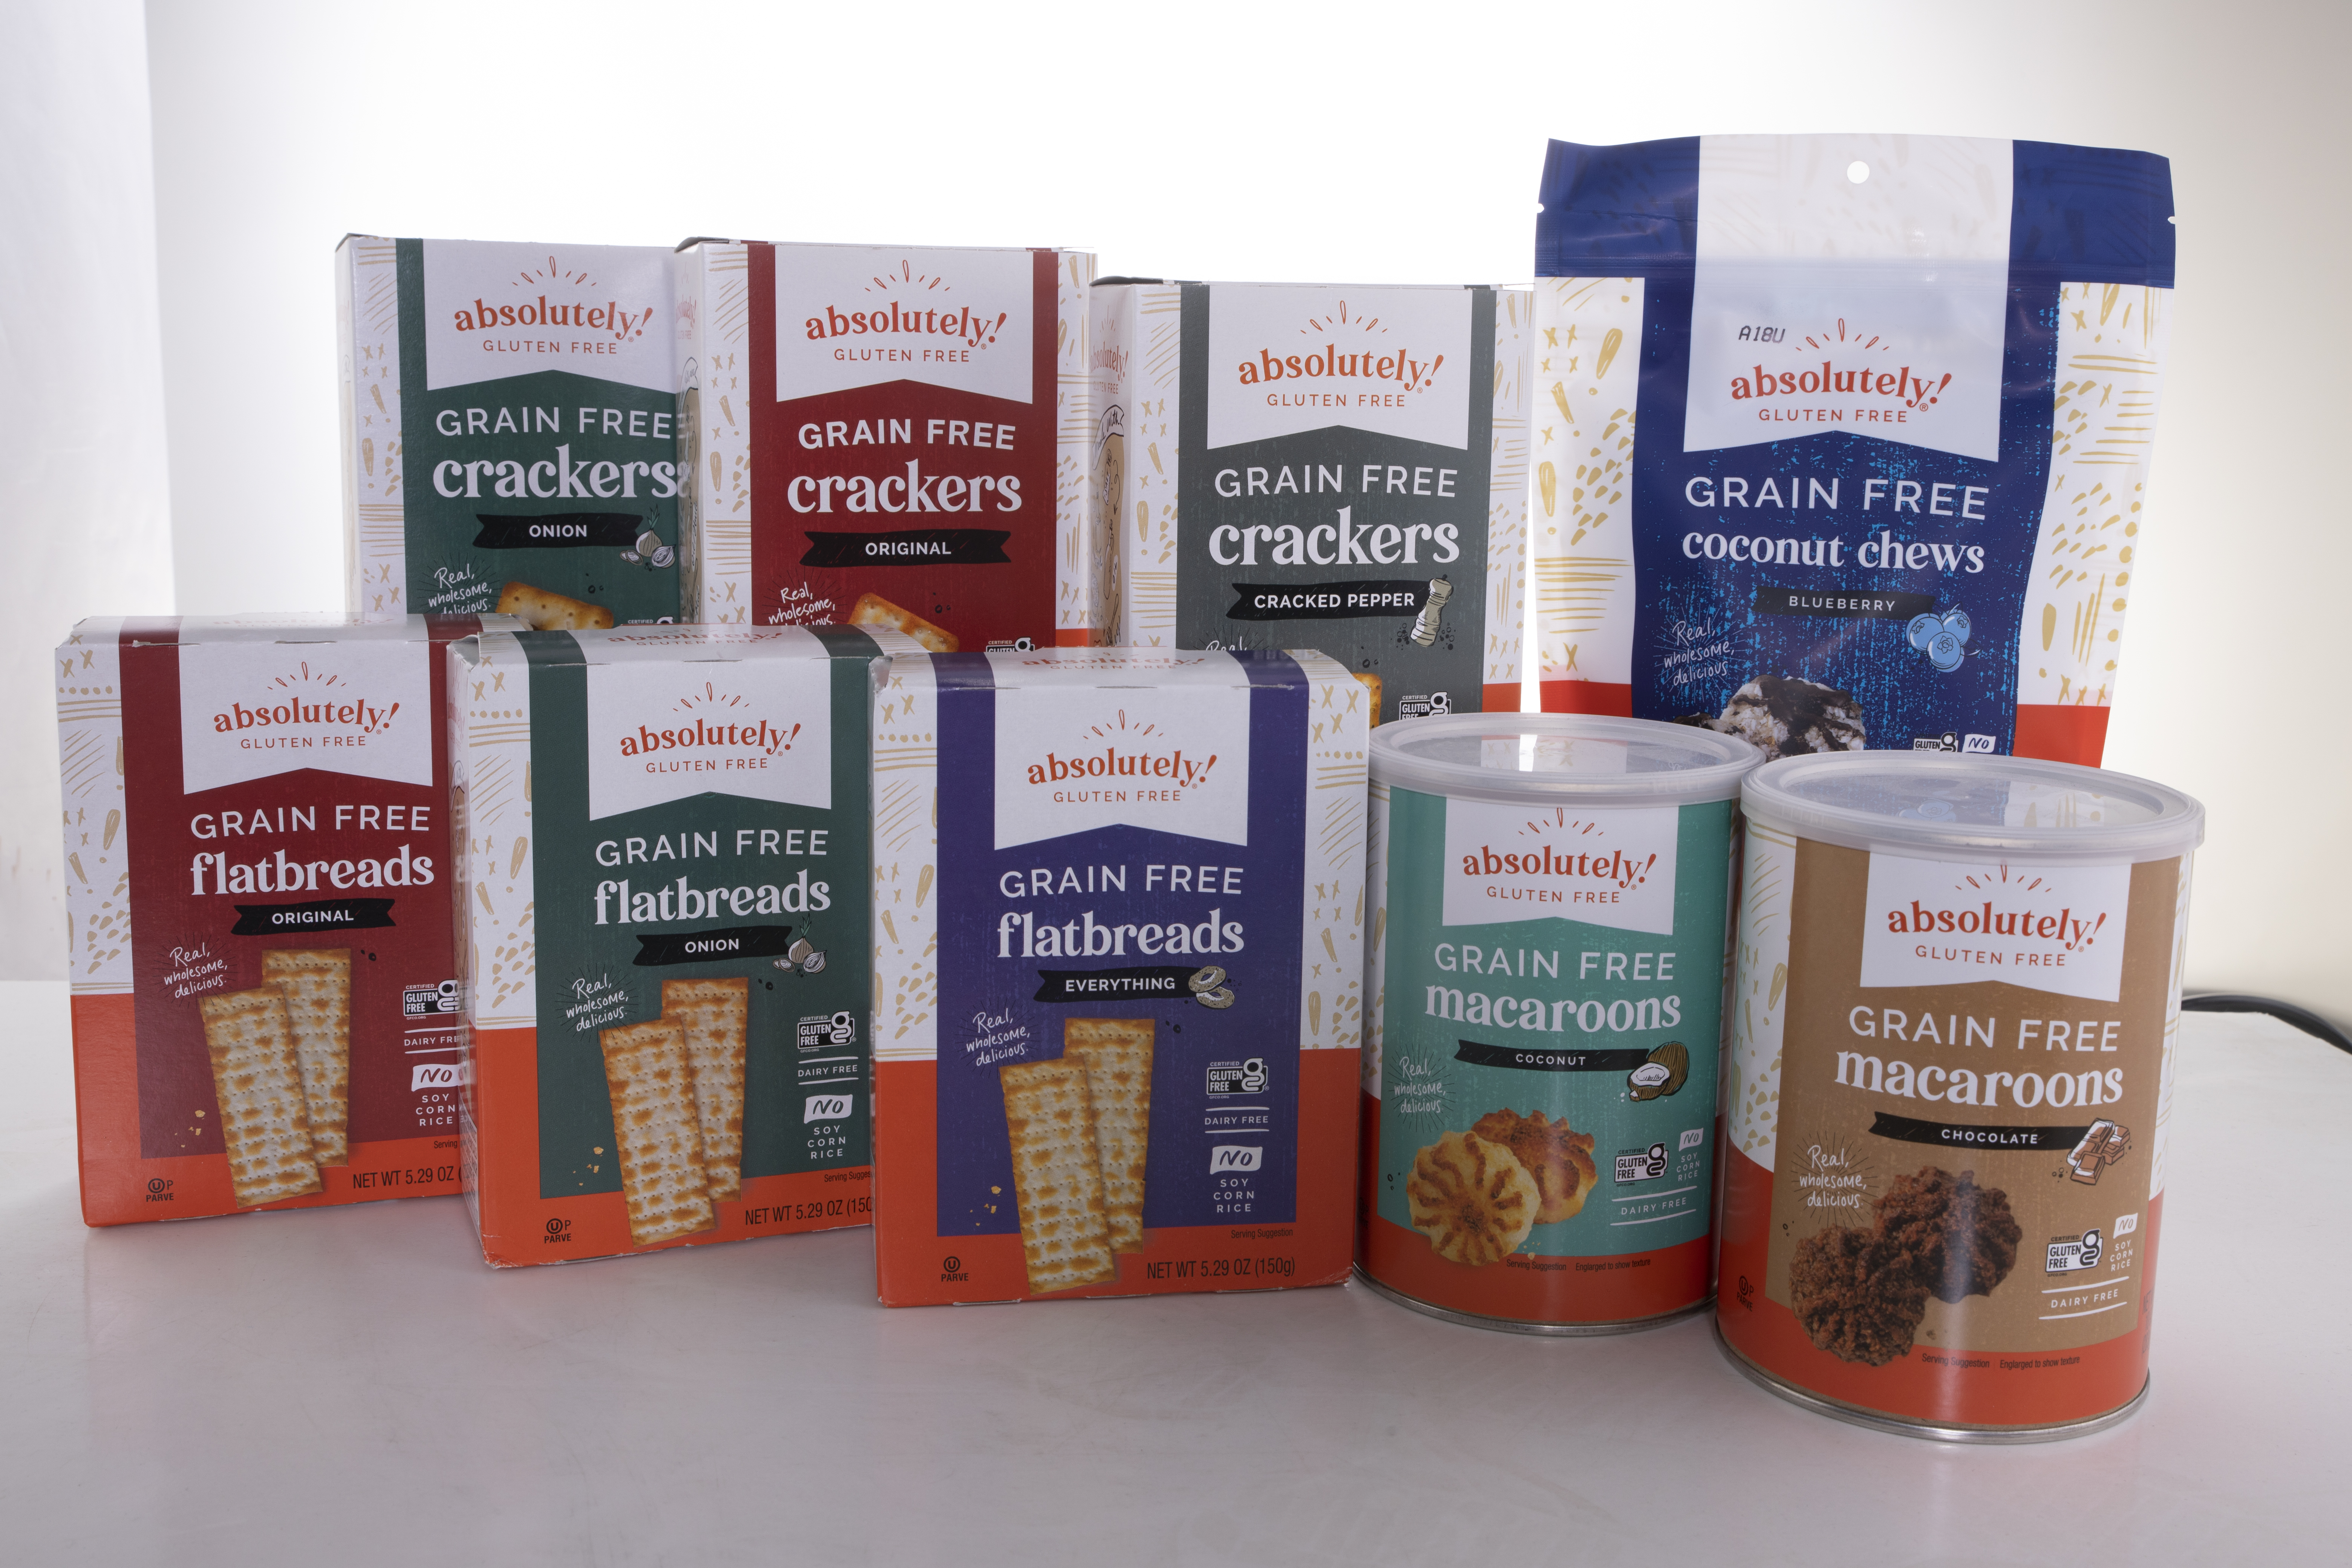 Absolutely! Gluten Free Launches New Look and Varieties of Delicious Grain-Free Snacks